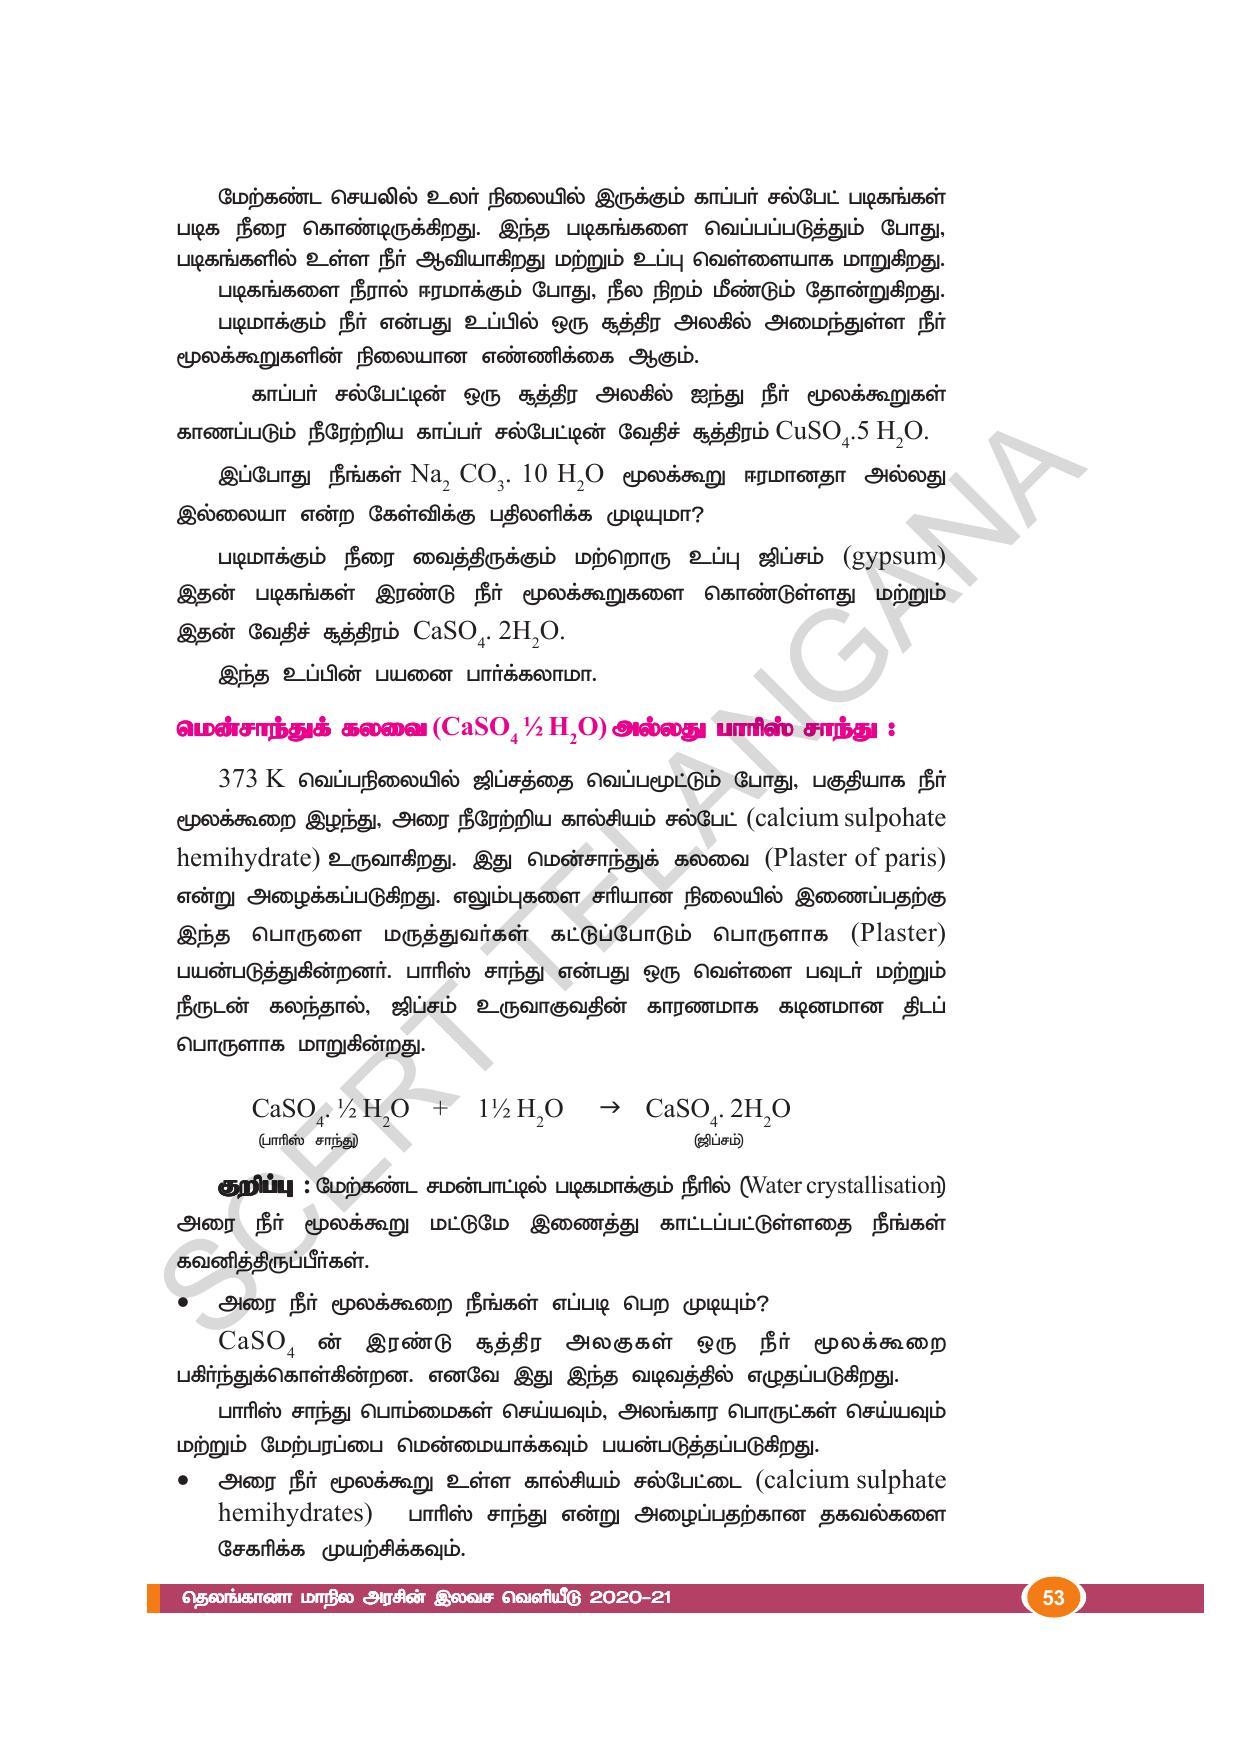 TS SCERT Class 10 Physical Science(Tamil Medium) Text Book - Page 65